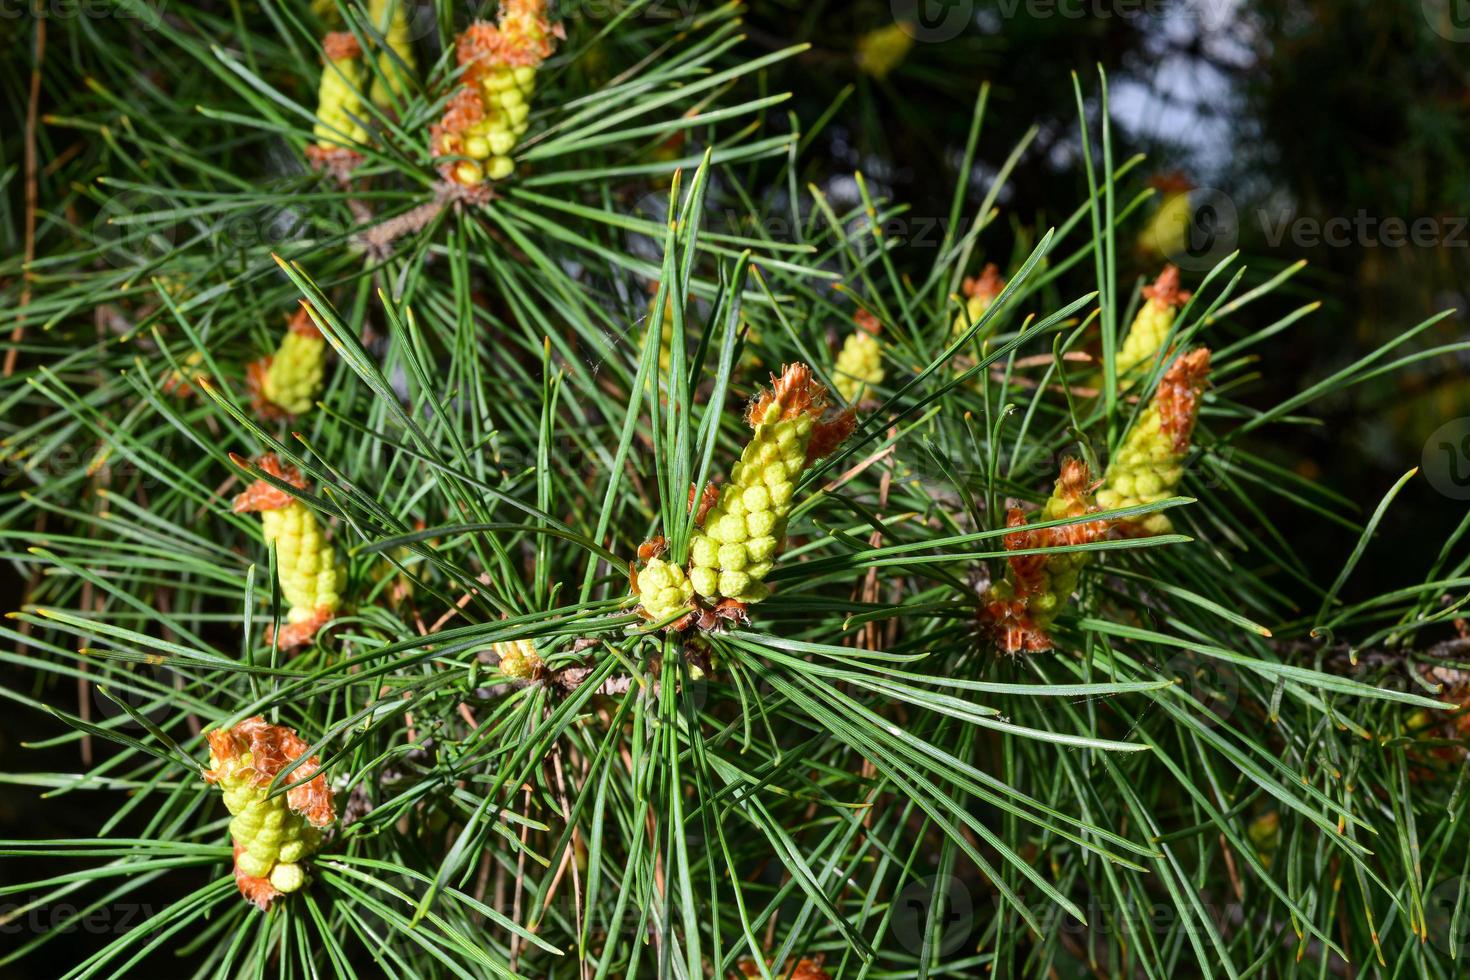 Young shoots on the branches of a pine tree in the spring season photo